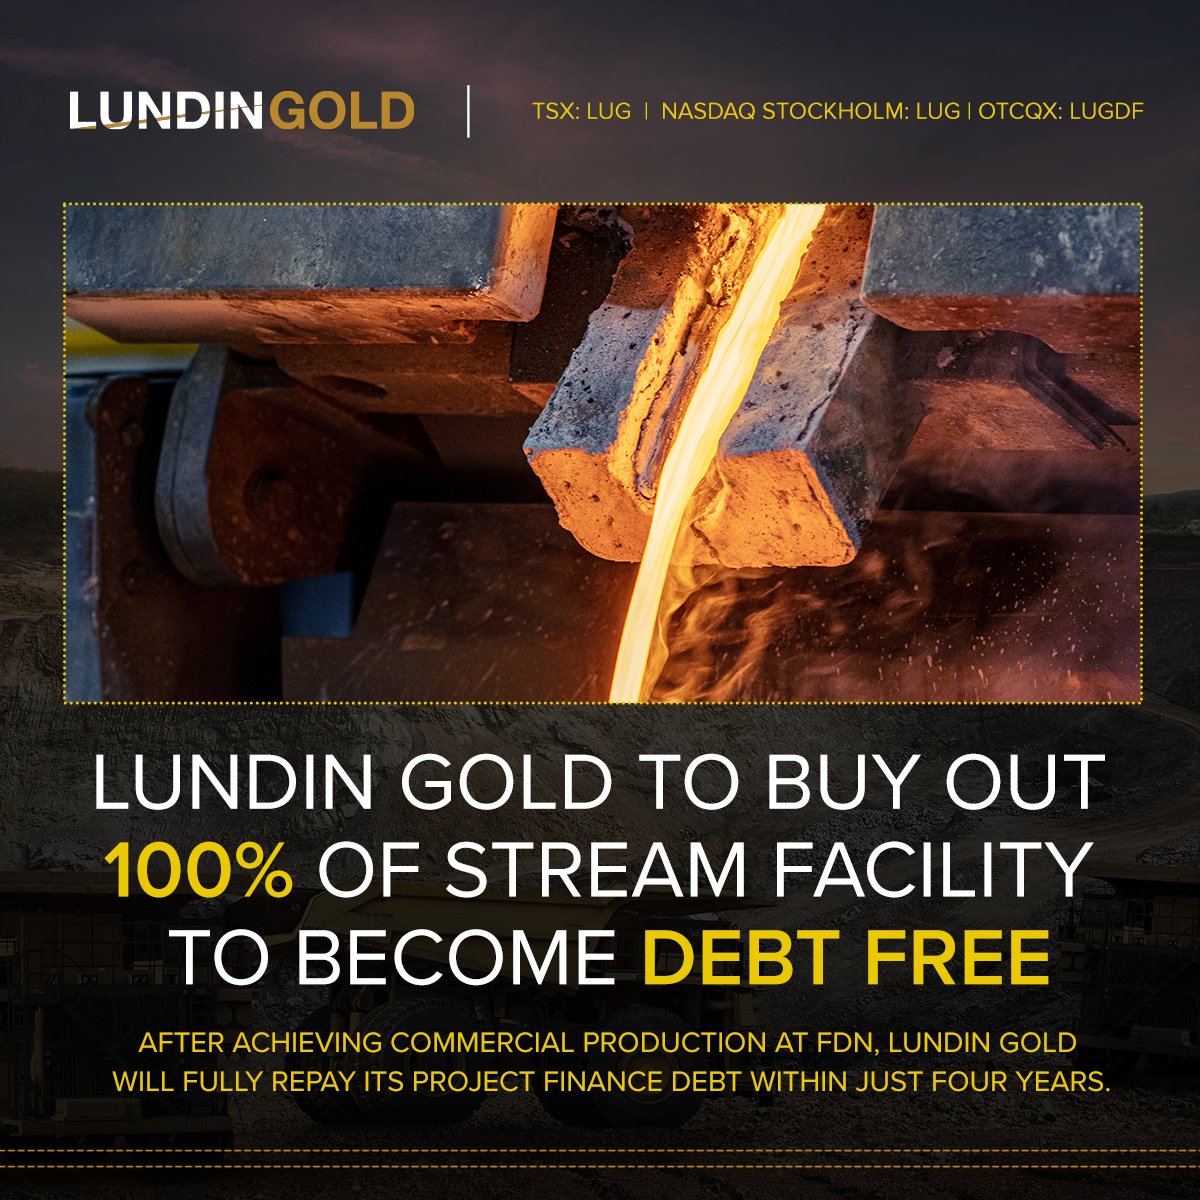 ⚒️ $LUG is excited to announce that it has entered into an agreement with Newmont to buy put 100% of the balance of the #FDN stream credit facility and offtake agreement for total consideration of $330 million. 🤝 With this milestone complete, $LUG will have repaid in full all…